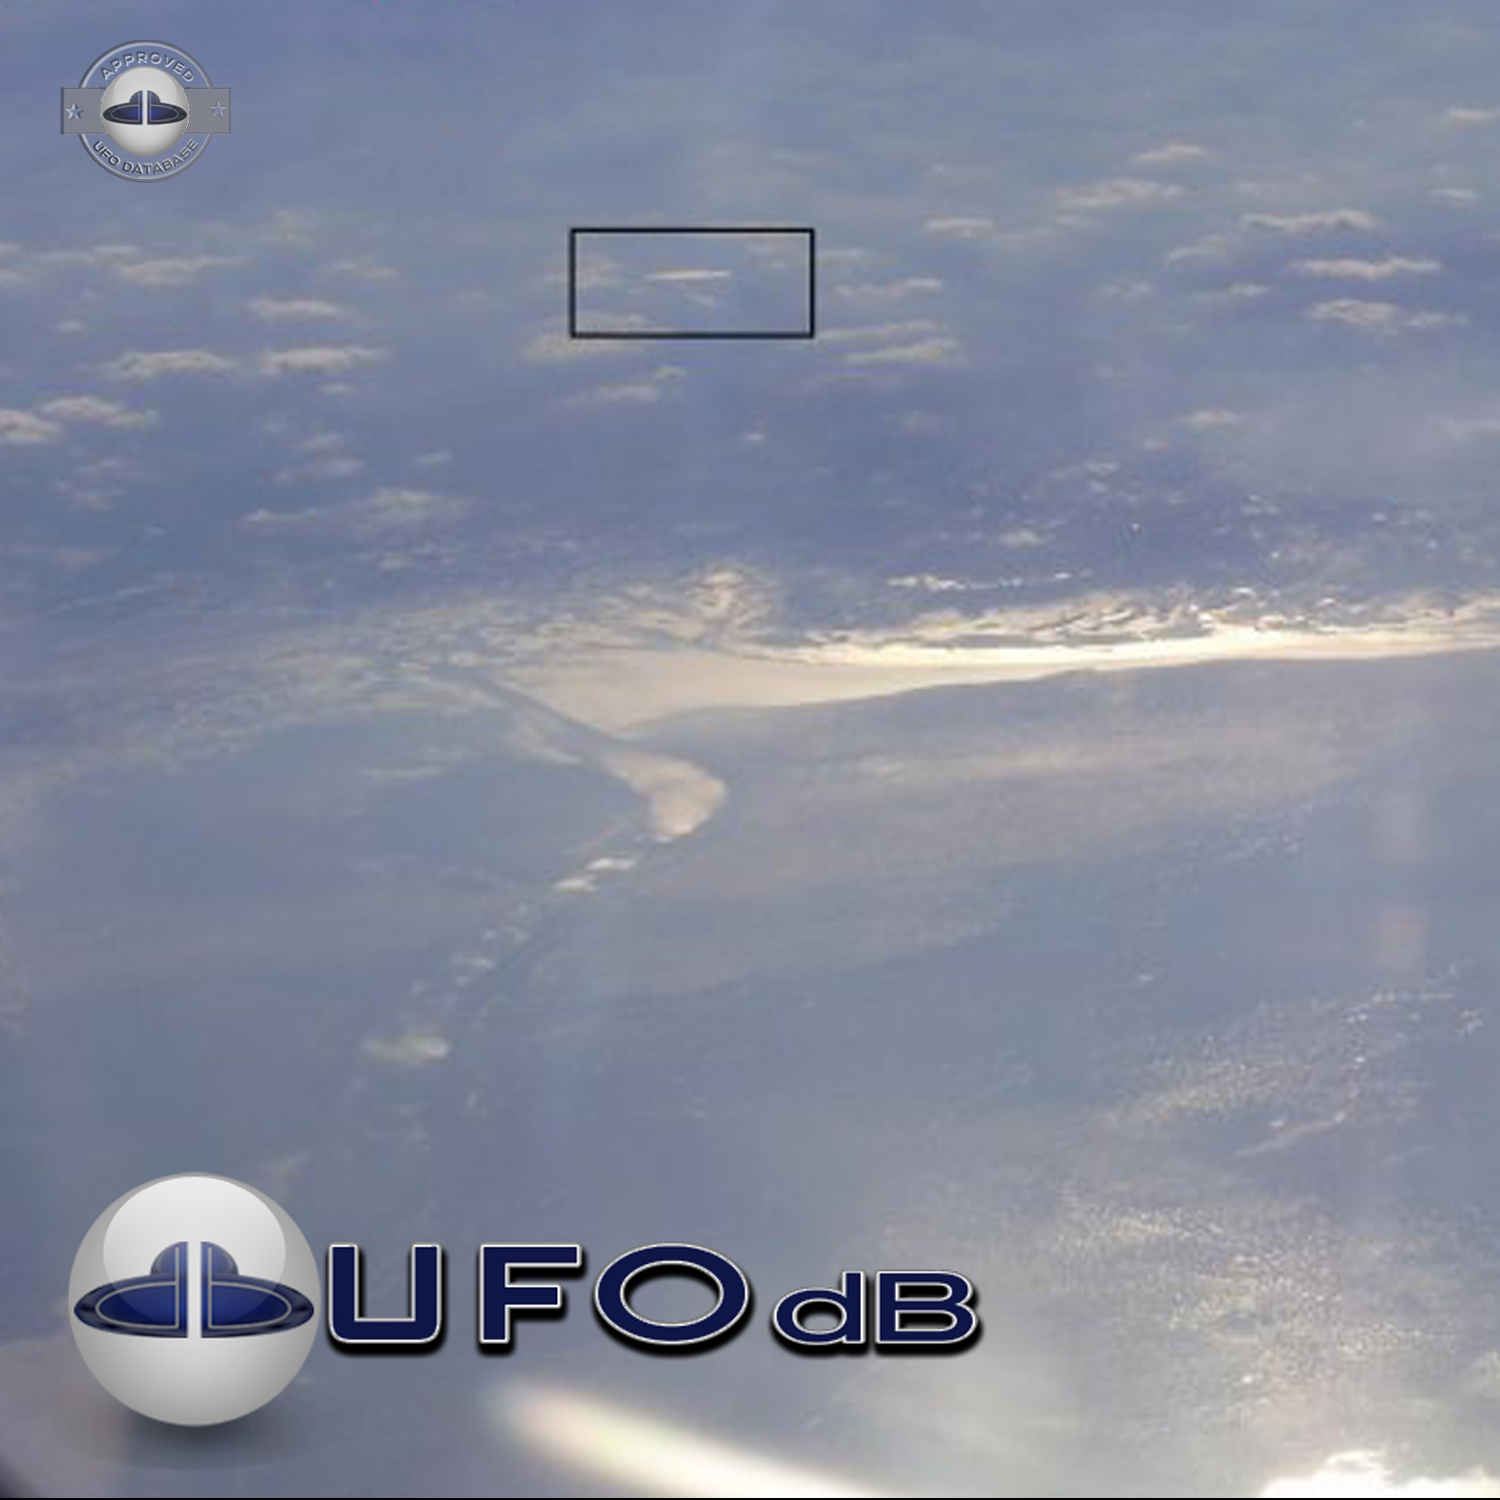 Black Sea UFO picture shot from Airplane | Turkey | January 10 2010 UFO Picture #207-2